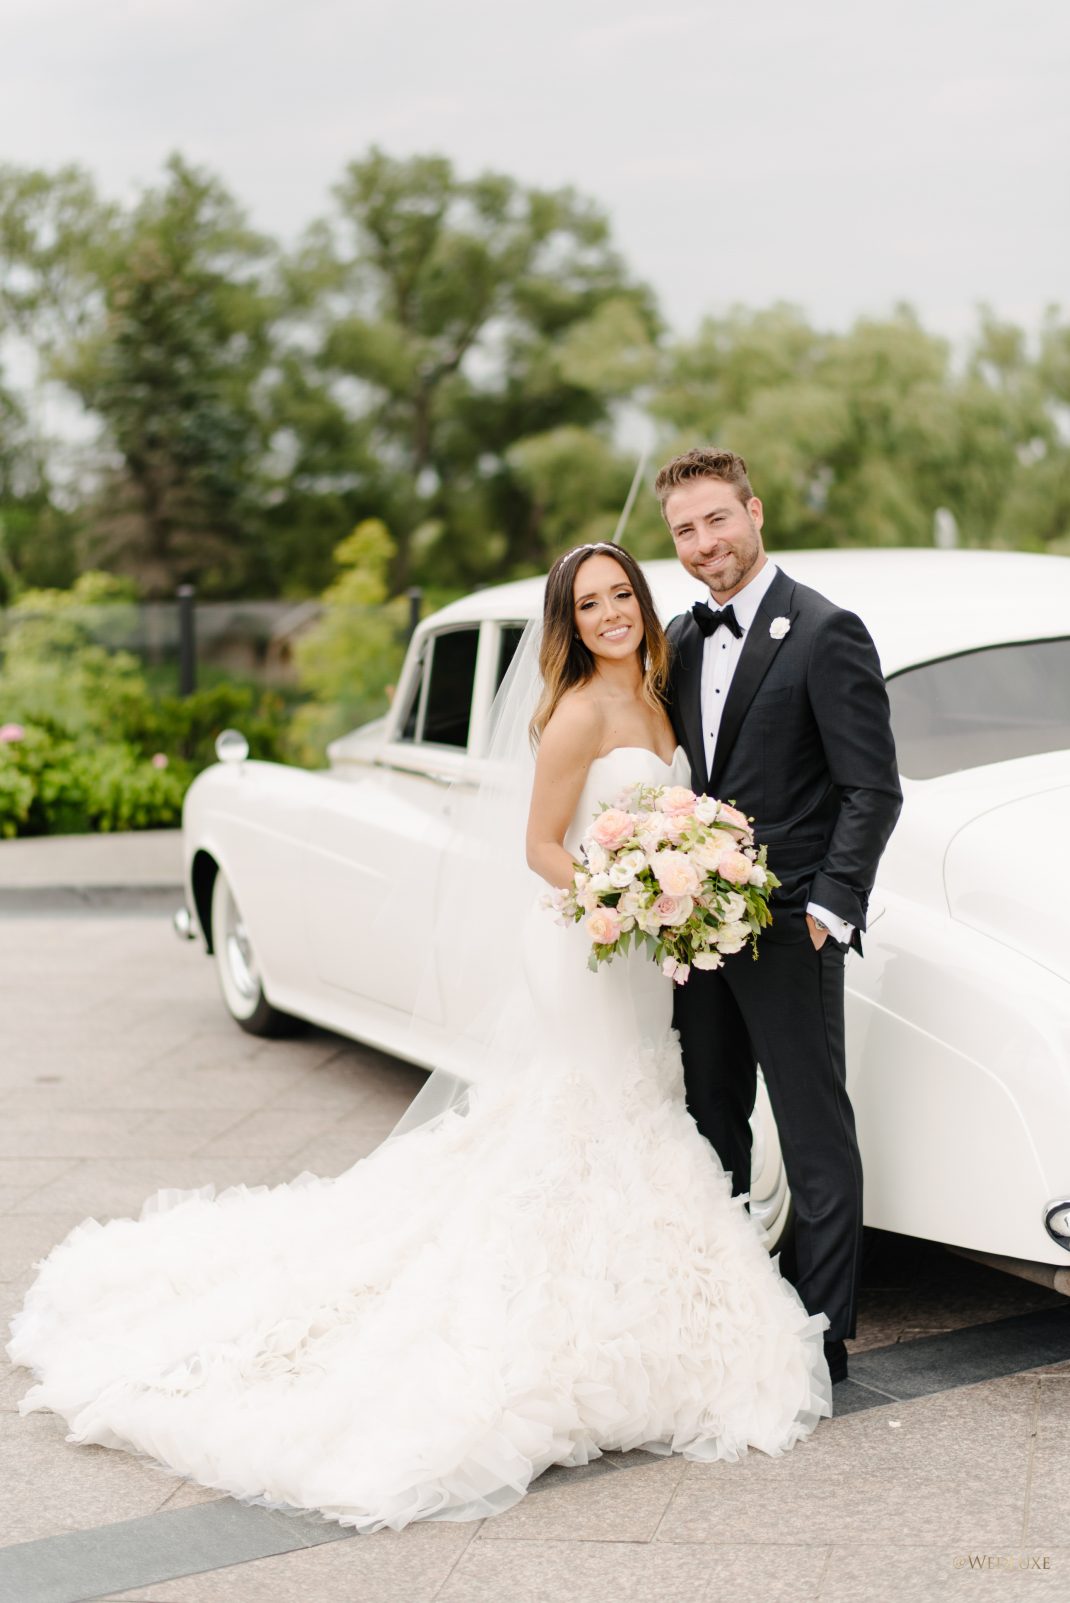 Happy Newlyweds outside with limo